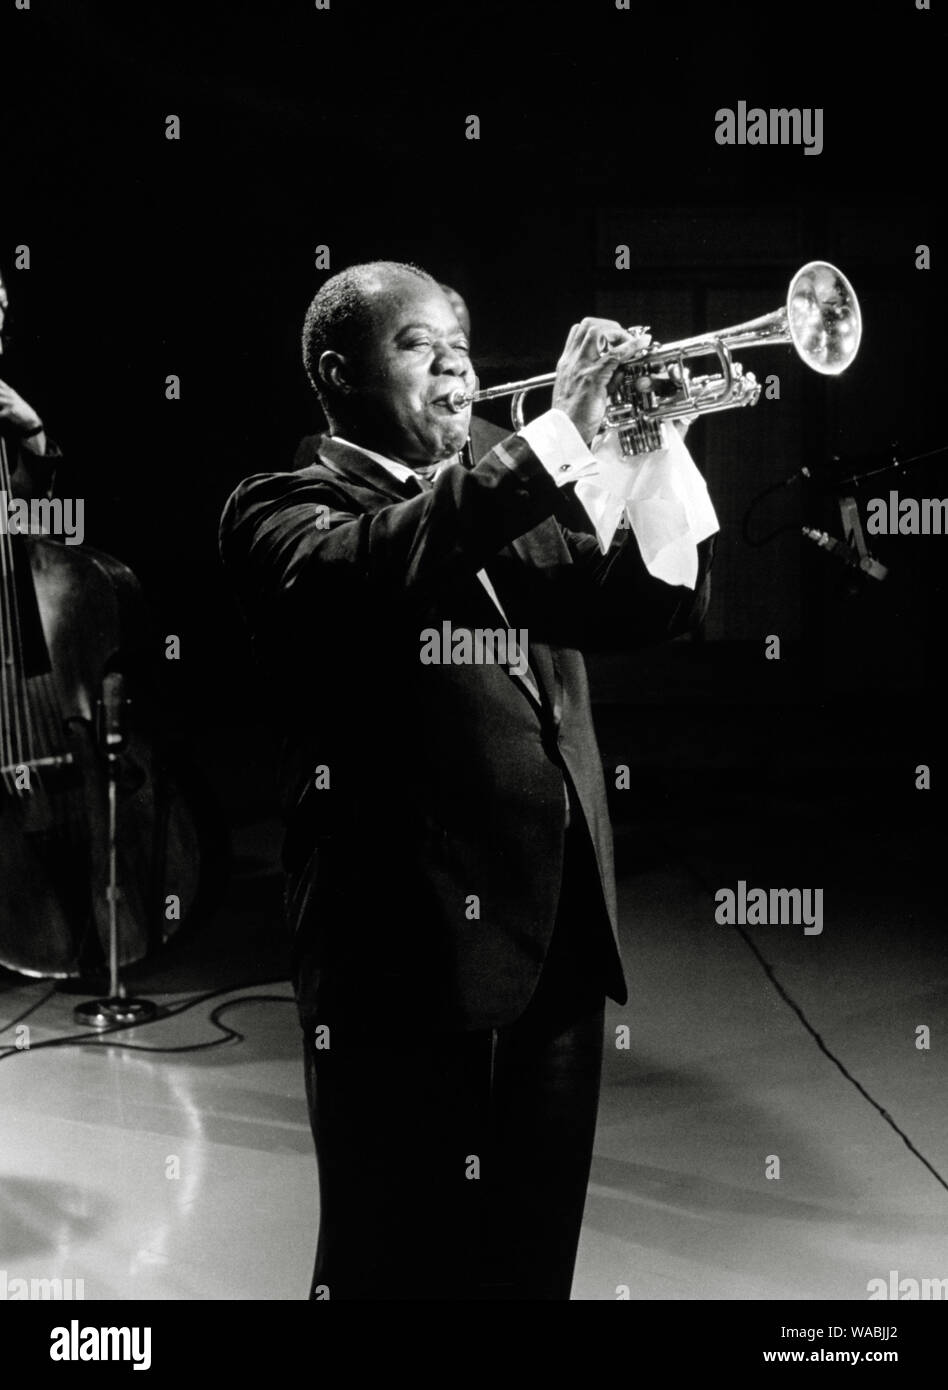 Louis Armstrong, 'The Dean Martin Show' (1965) NBC  File Reference # 33848-206THA Stock Photo